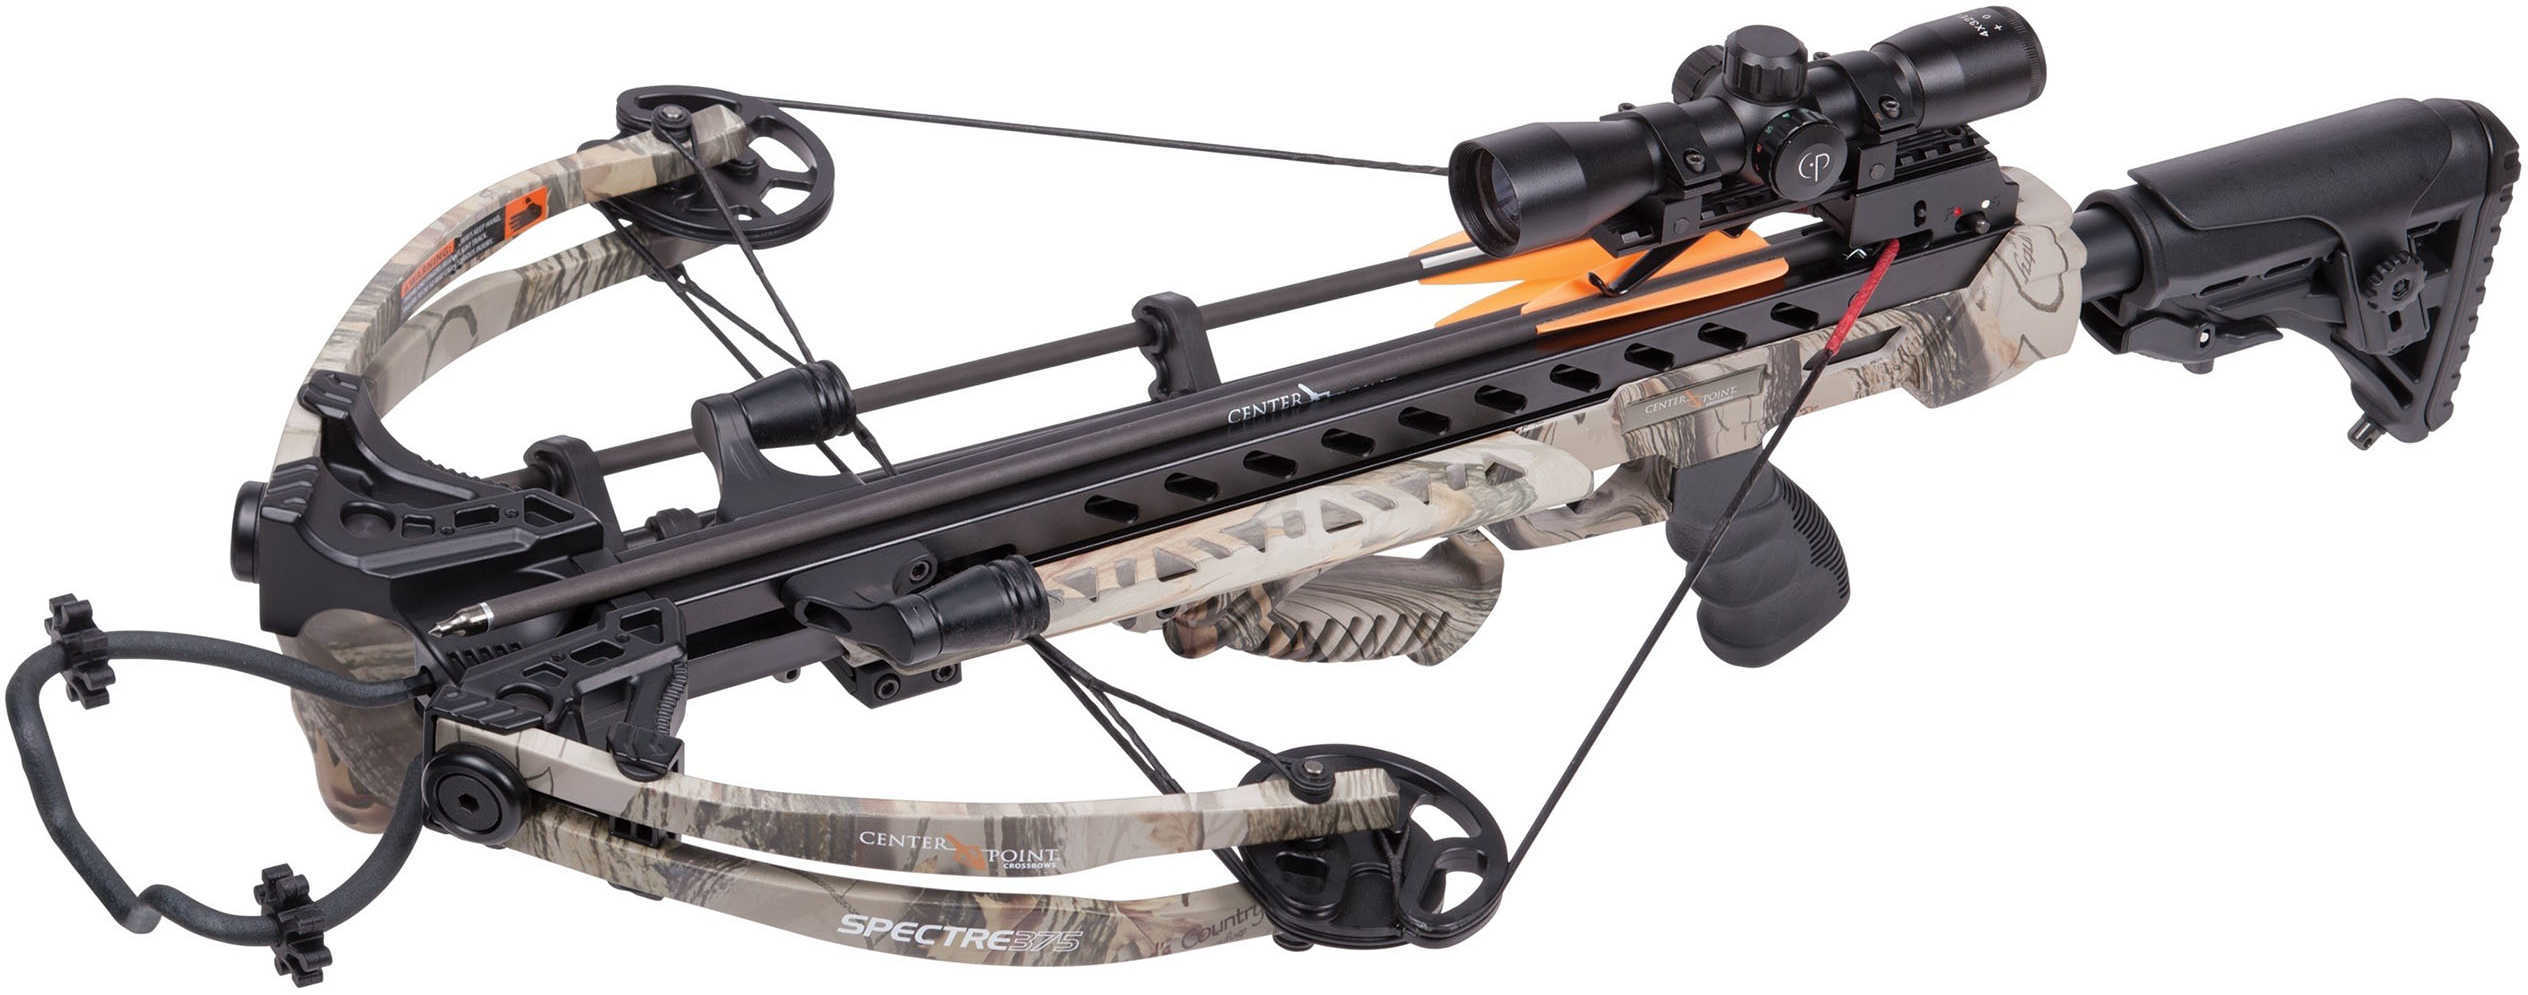 Crosman Spectre 375 Compound Crossbow Package - 11236784